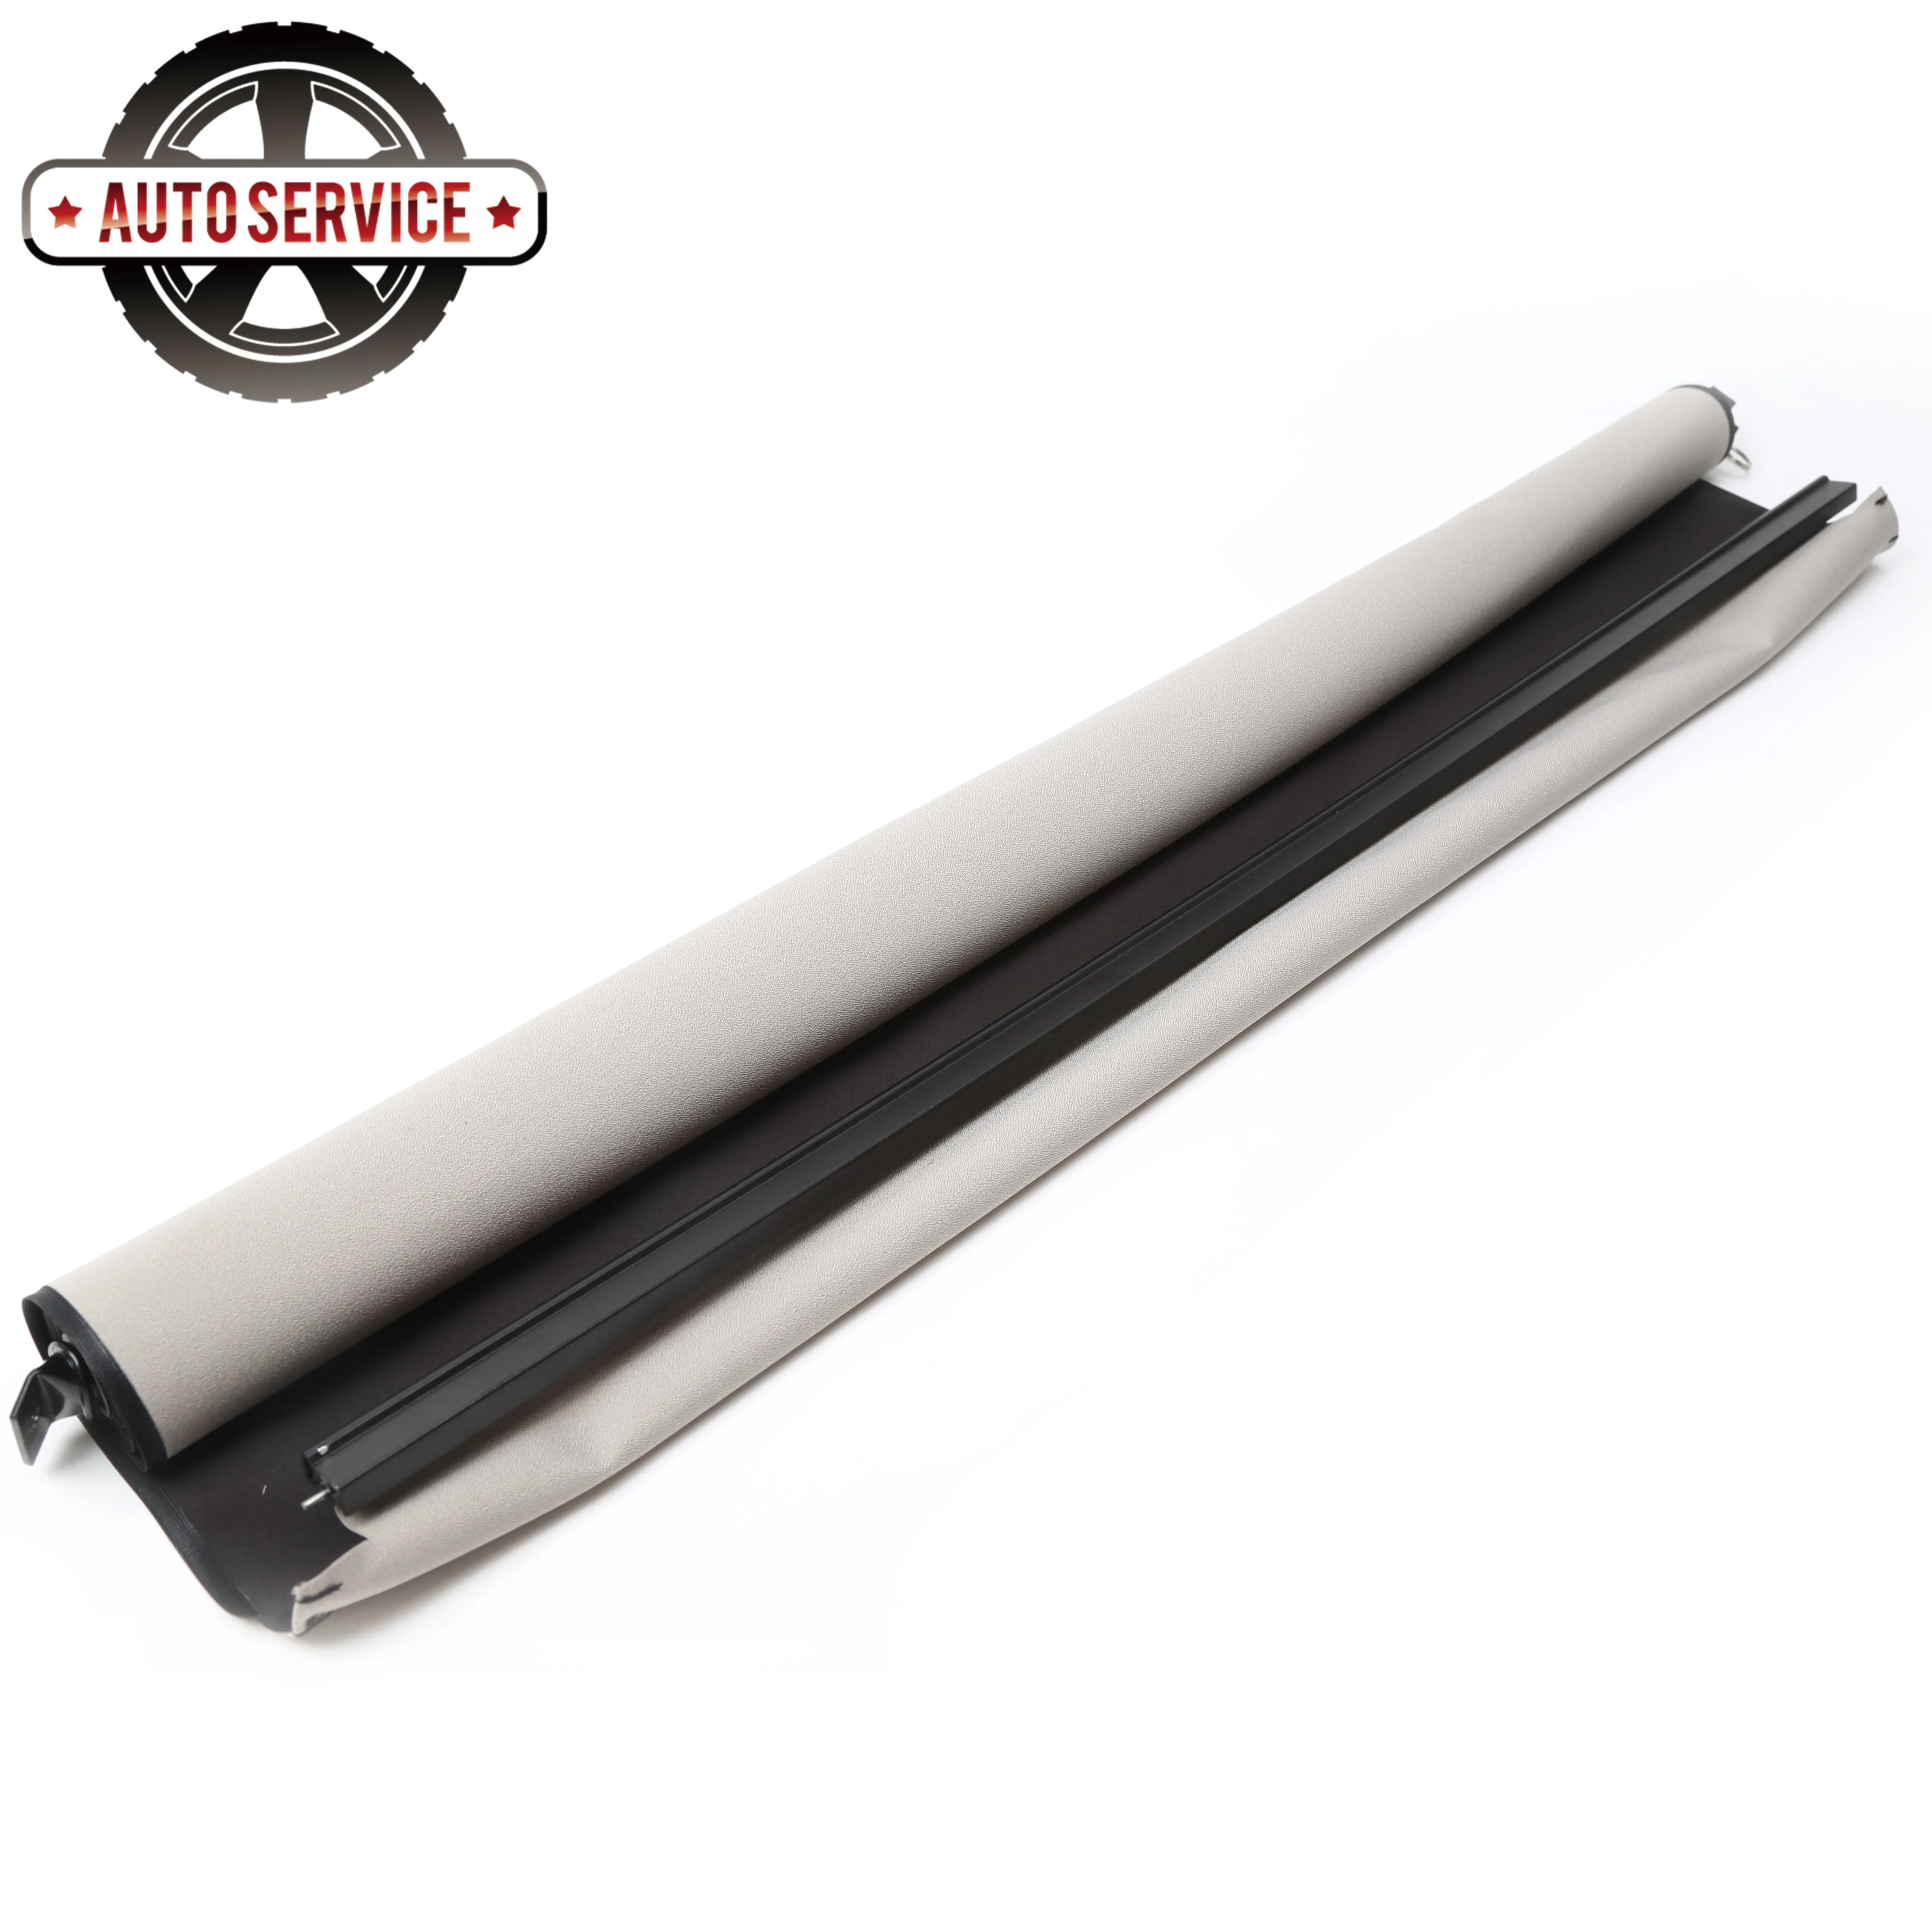 

25964410 Gray Car Curtain Sunroof Sun Roof Curtain Shade Cover Roller Blind Assembly 25964409 For Cadillac SRX 2.8L 3.0L 3.6L V6